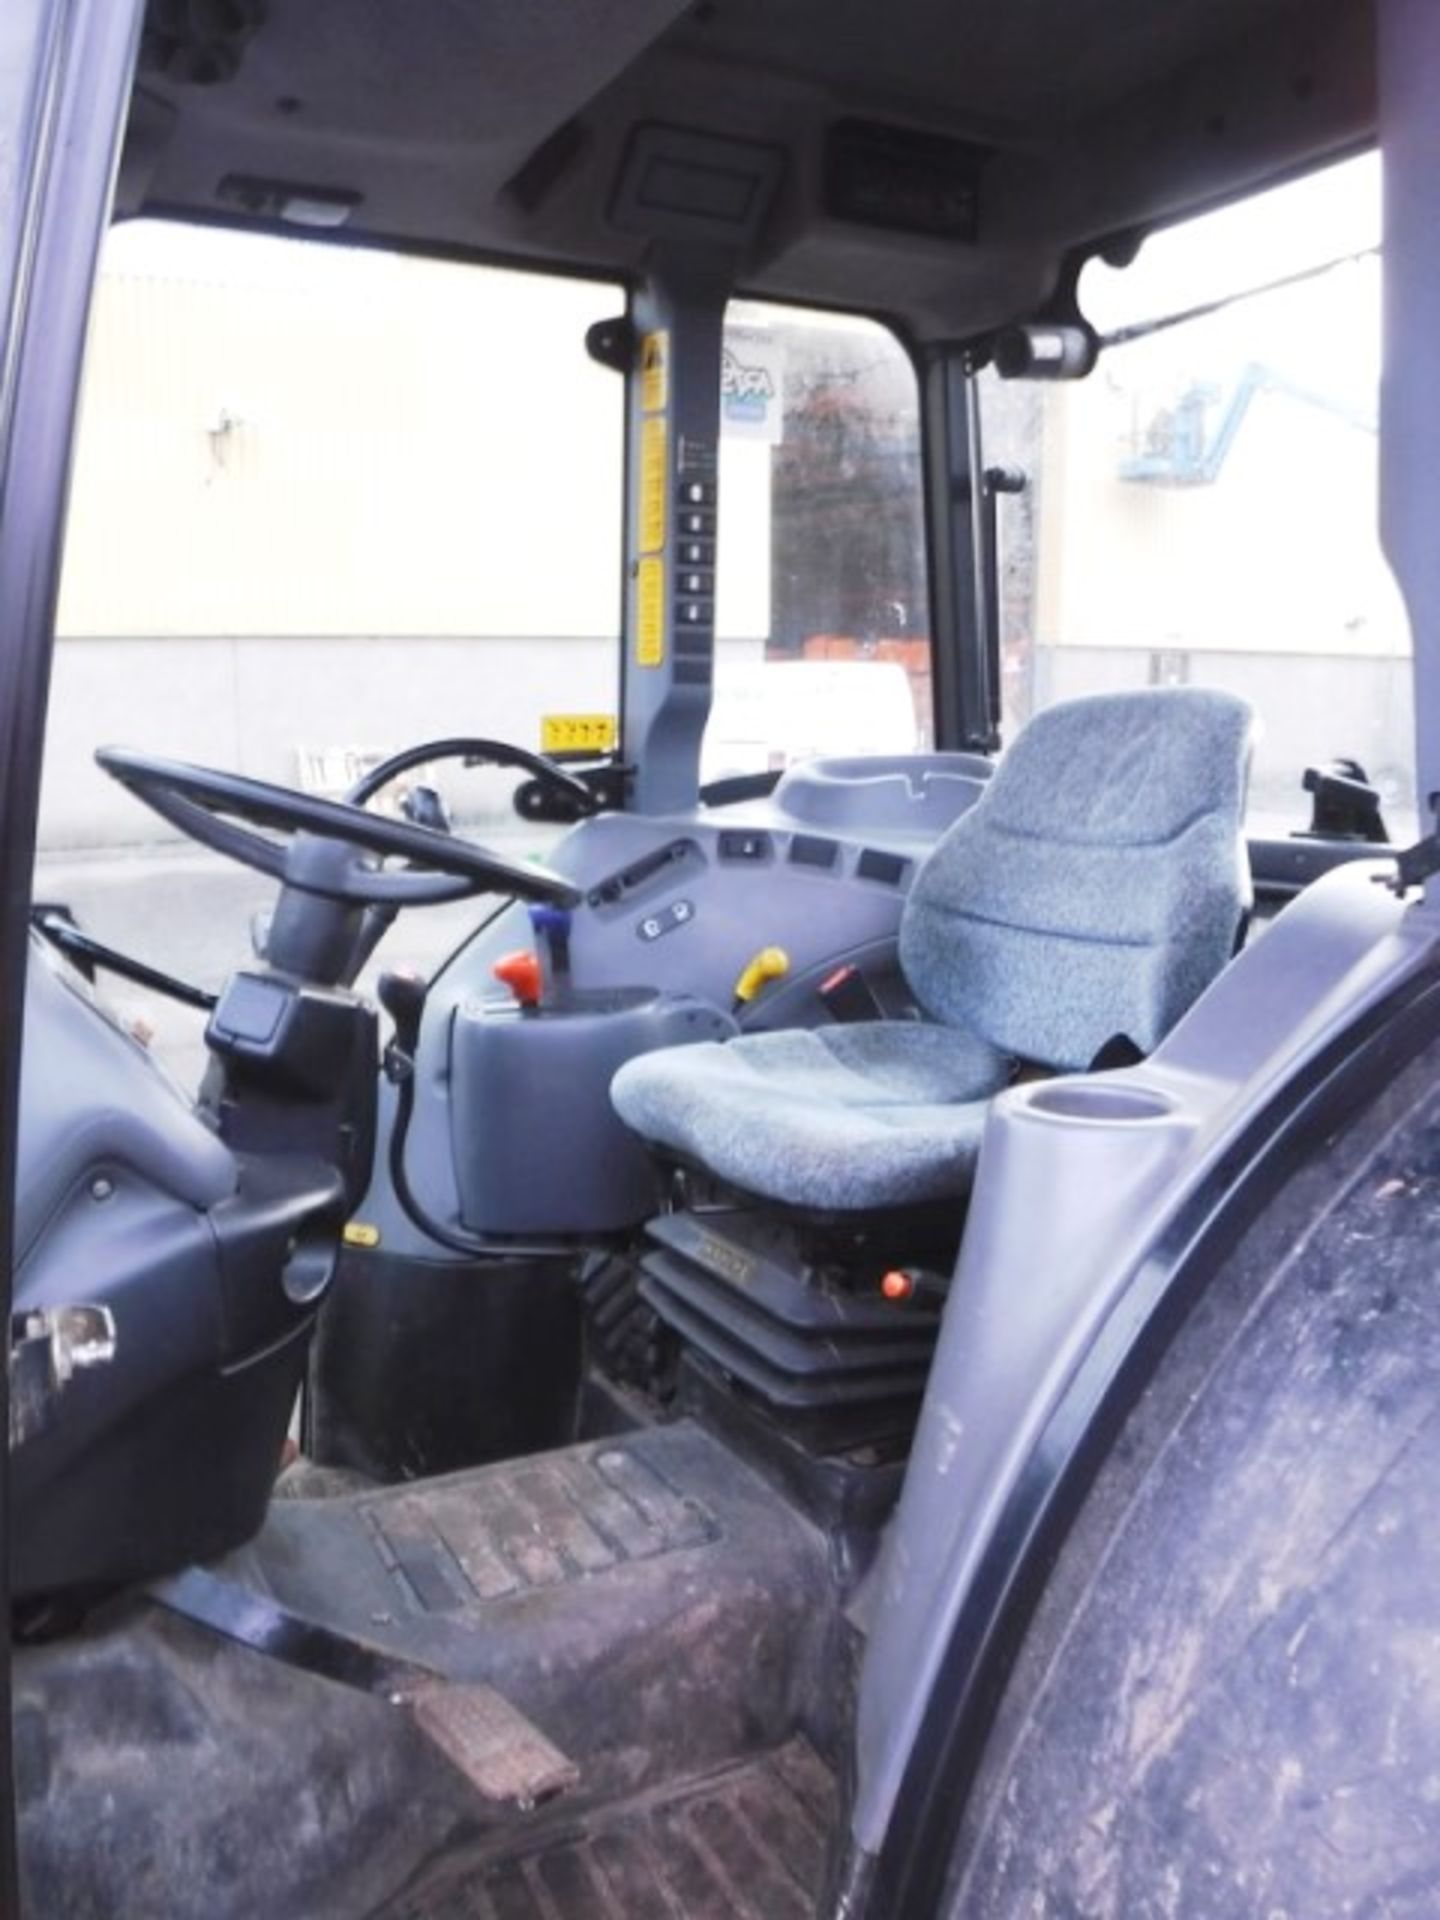 2008 NEW HOLLAND TN60 TRACTOR. REG NO SP08 DWY. SN 111054. GVW(TONNES) 4497, 3062HRS (NOT VERIFIED) - Image 16 of 40